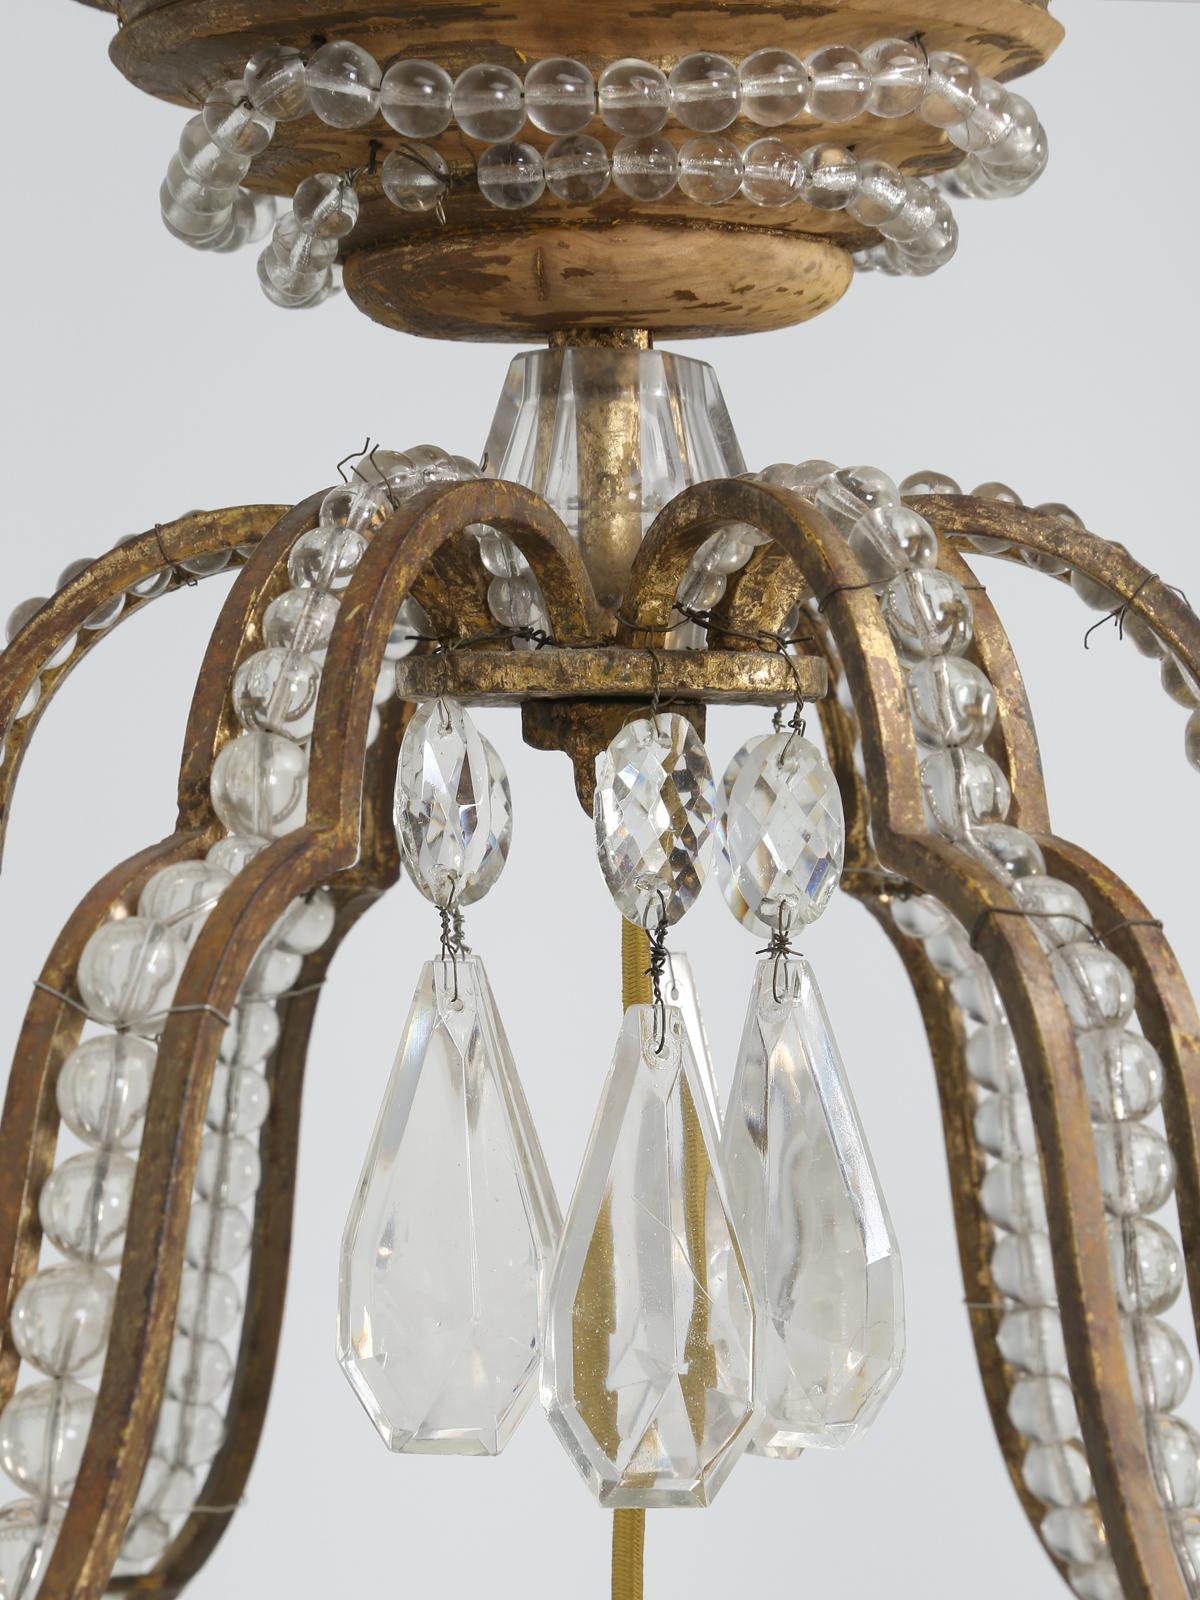 Metal Antique Exceptional Six-Light Italian Chandelier with Original Canopy